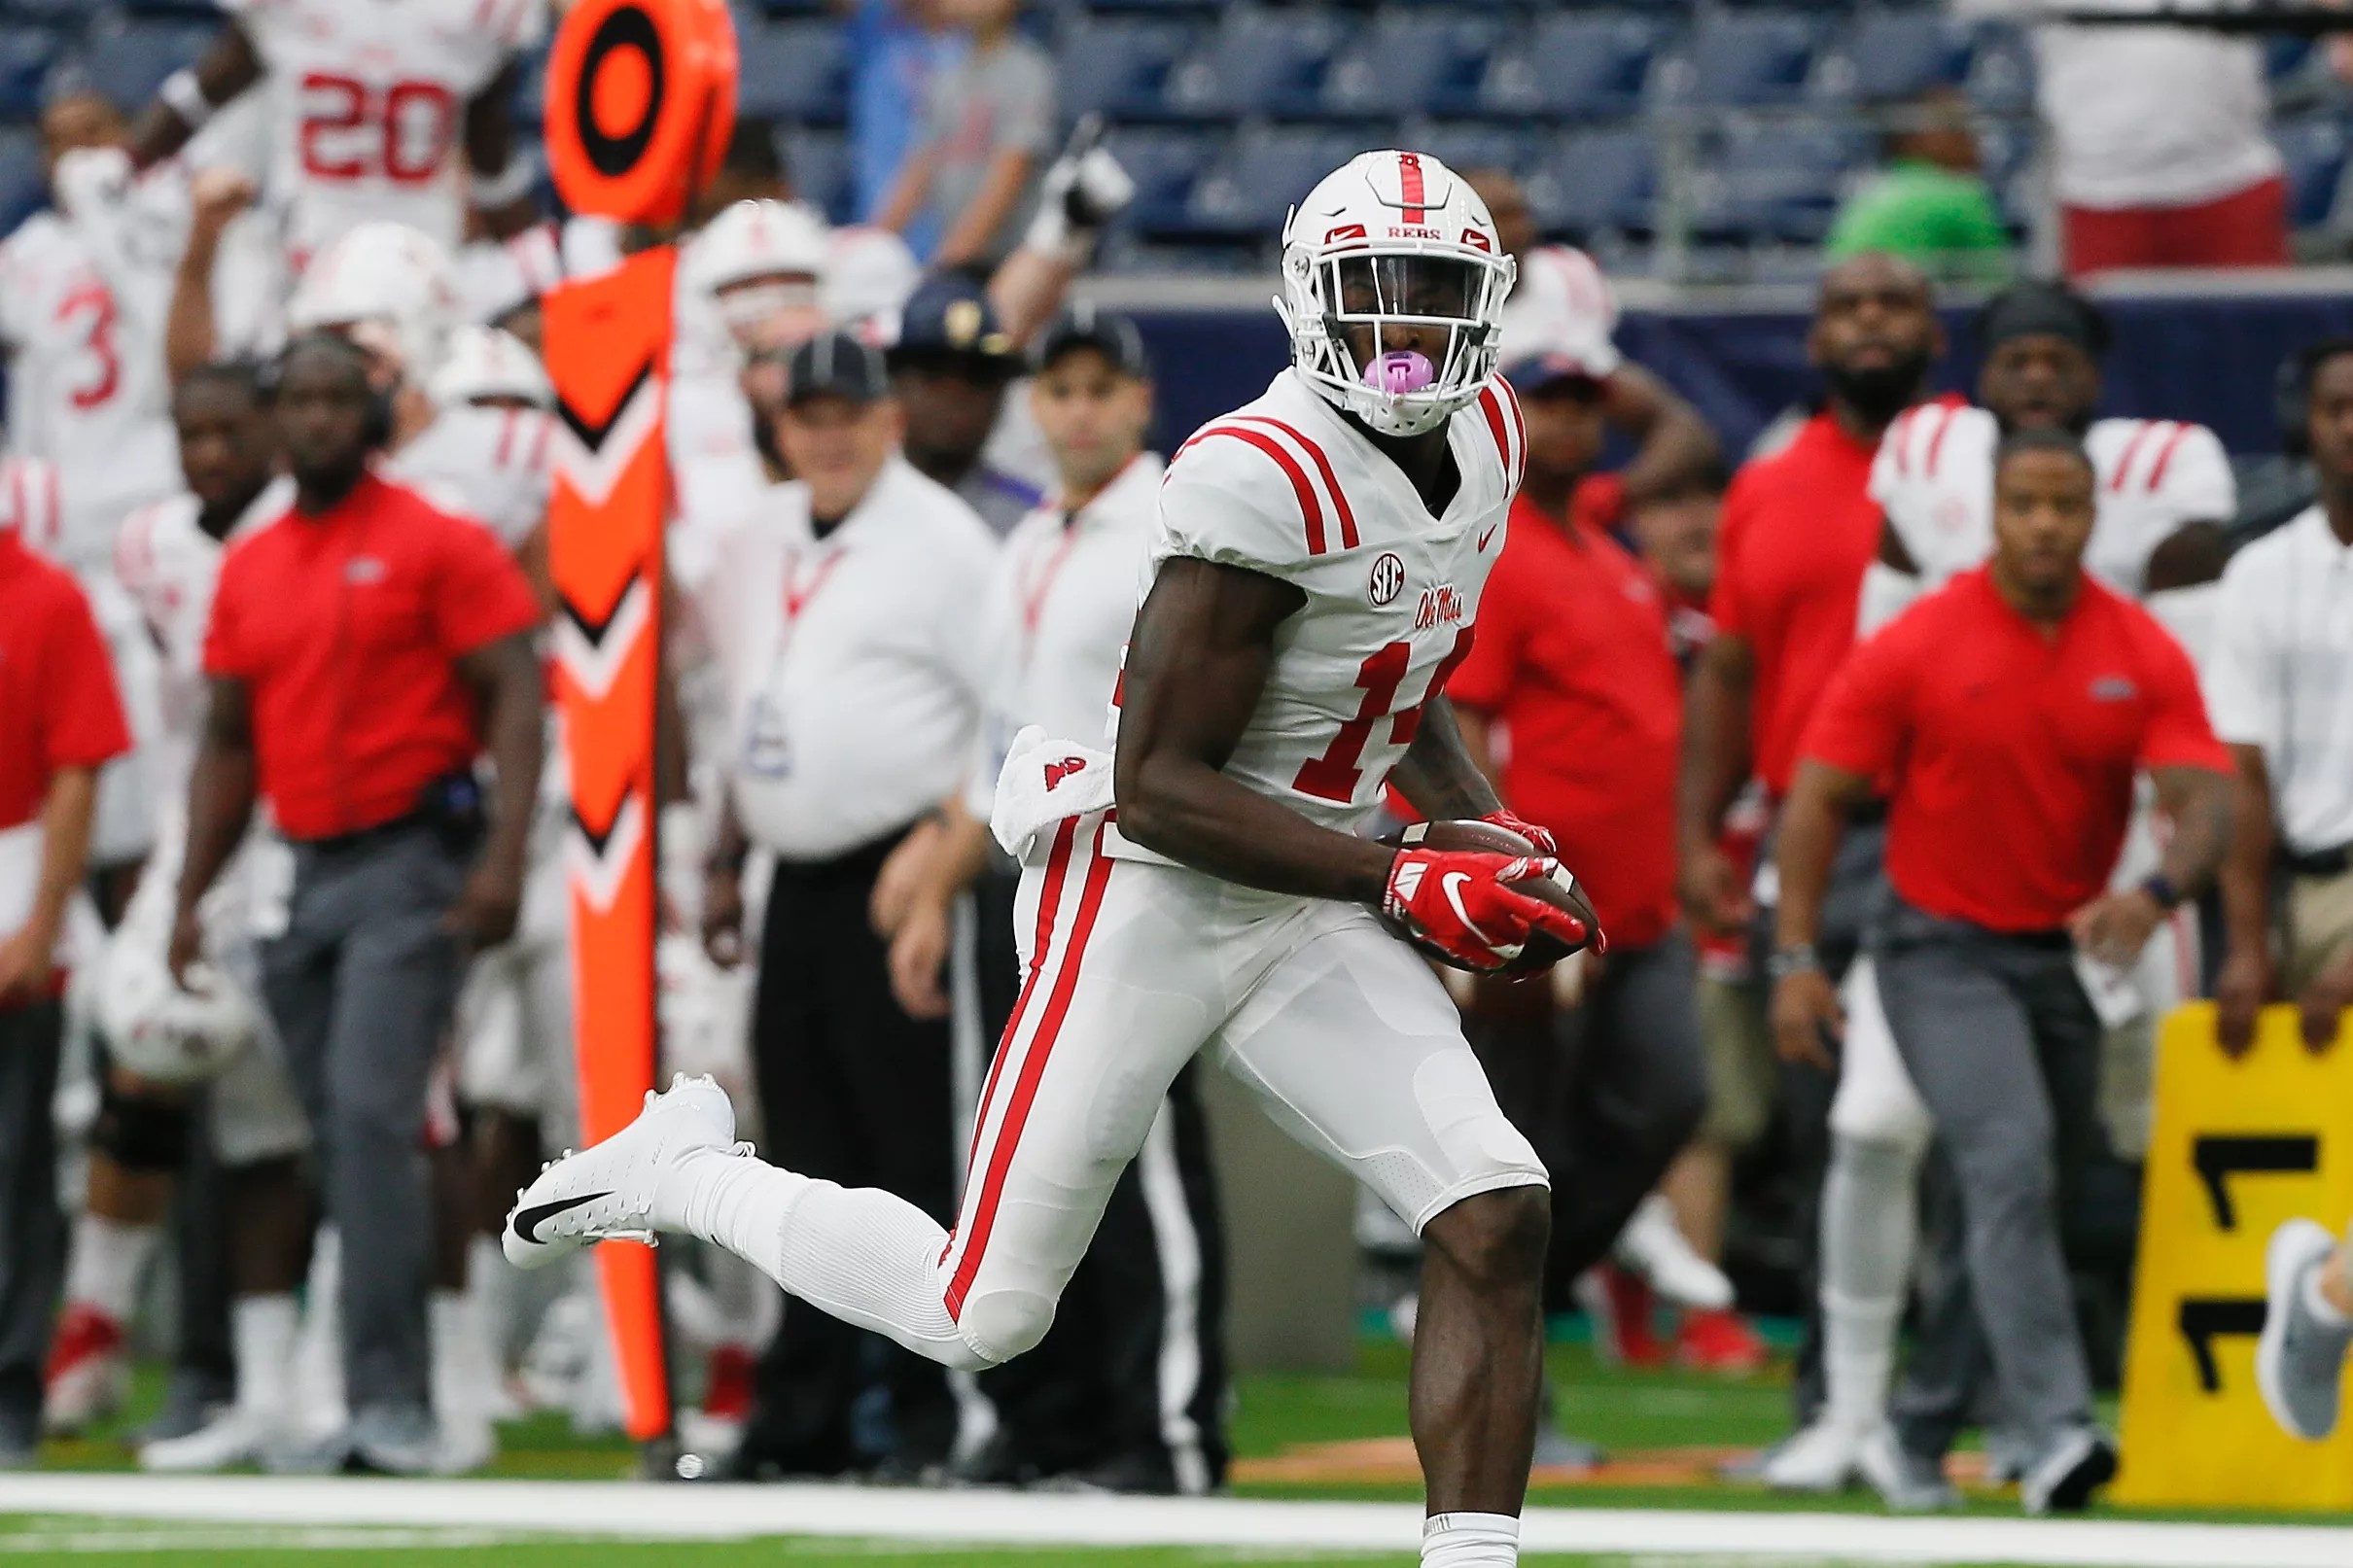 Why D.K. Metcalf is such a compelling draft prospect